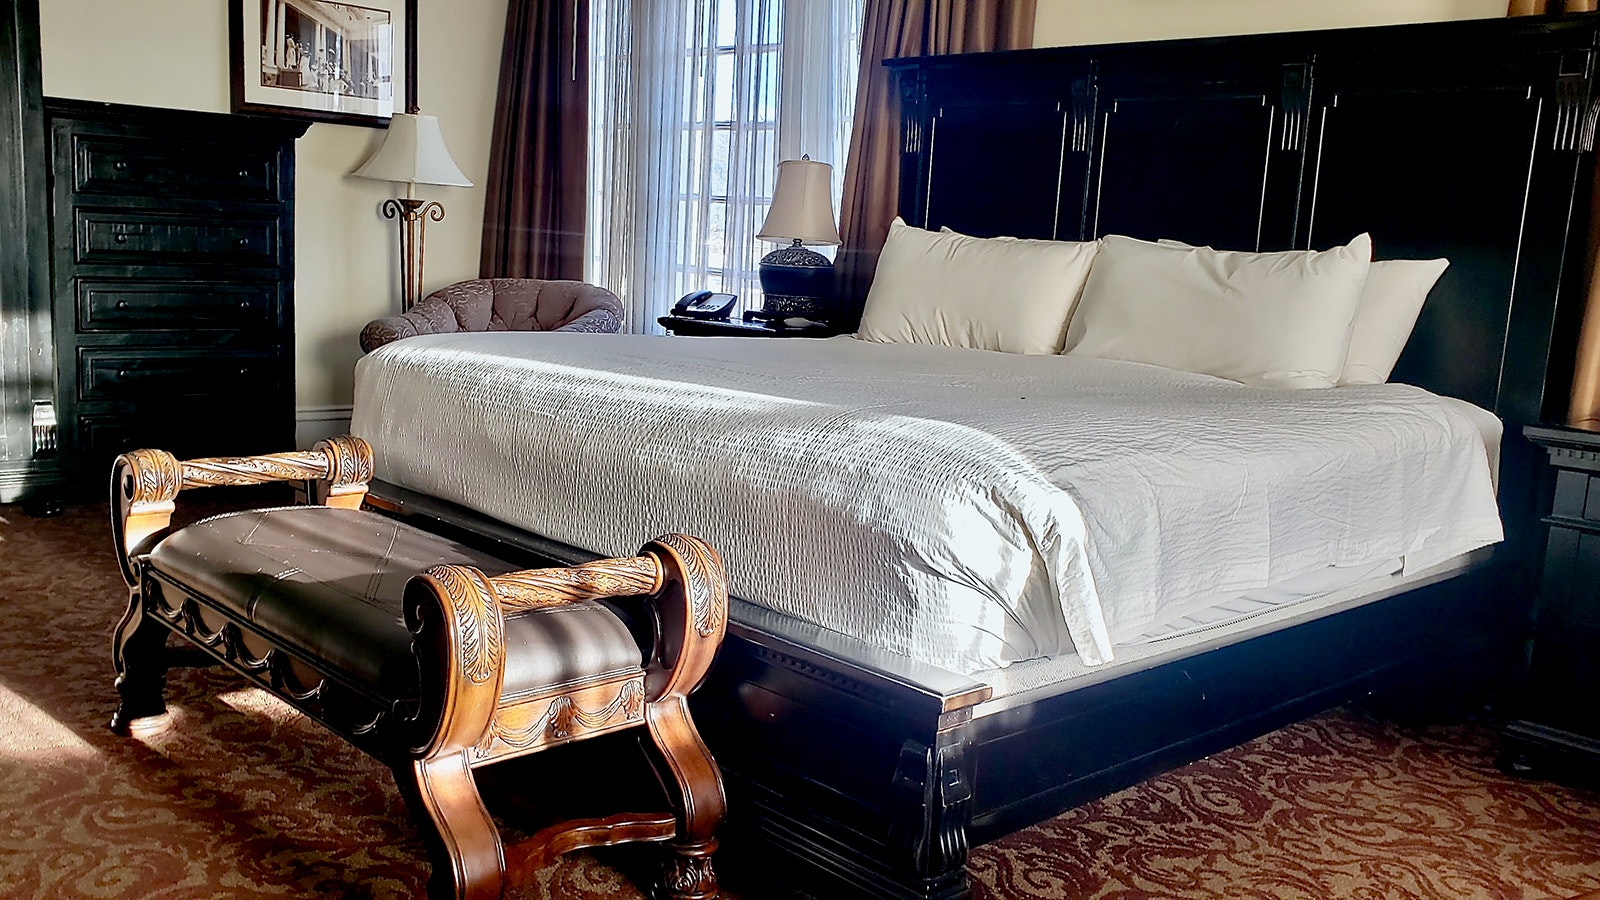 Room 217 at The Stanley Hotel includes the usual short-sheeted bed with comfy pillows.